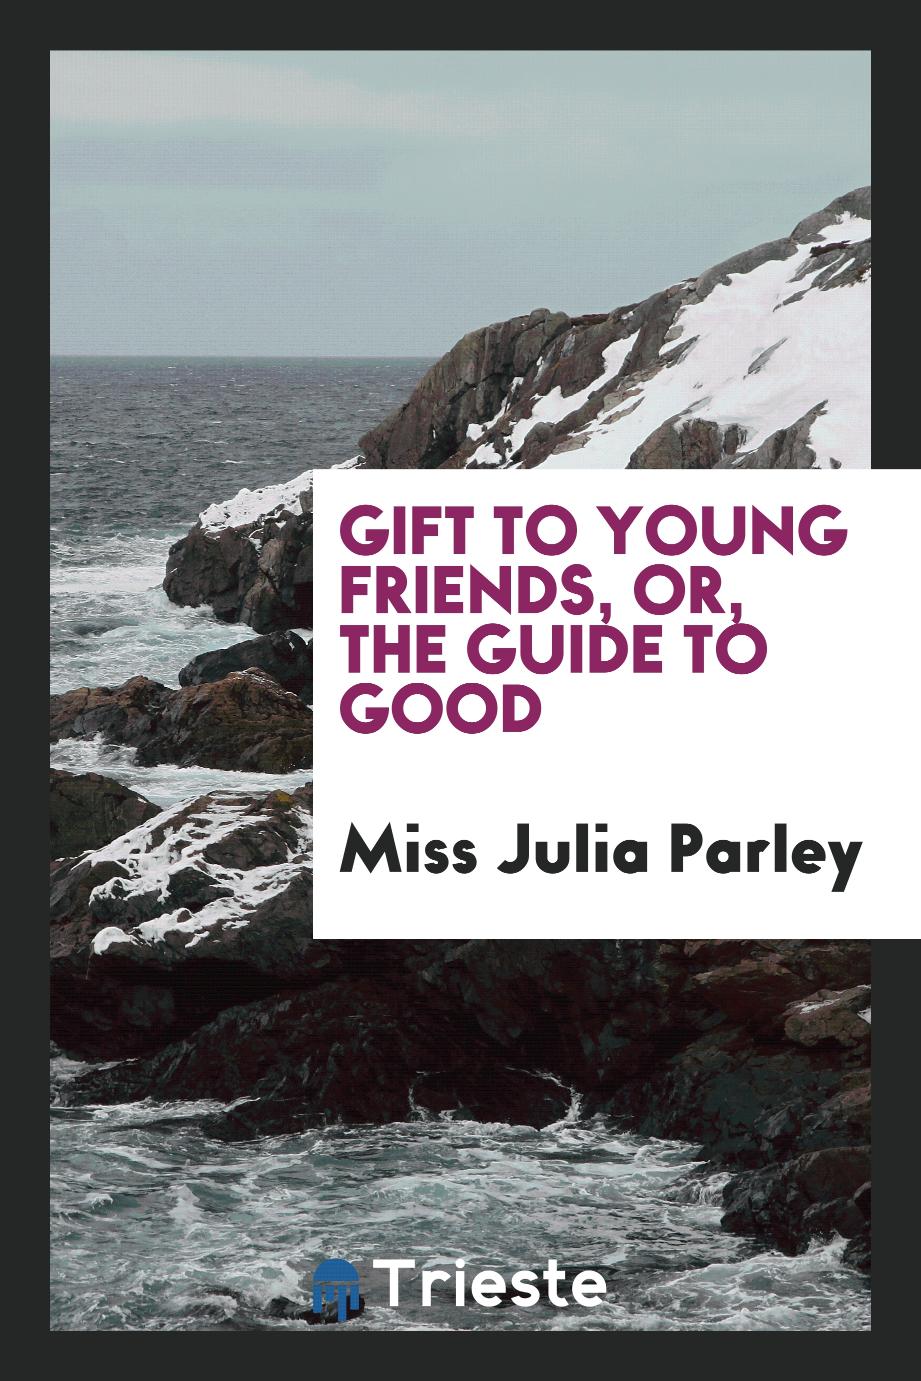 Gift to young friends, or, The guide to good